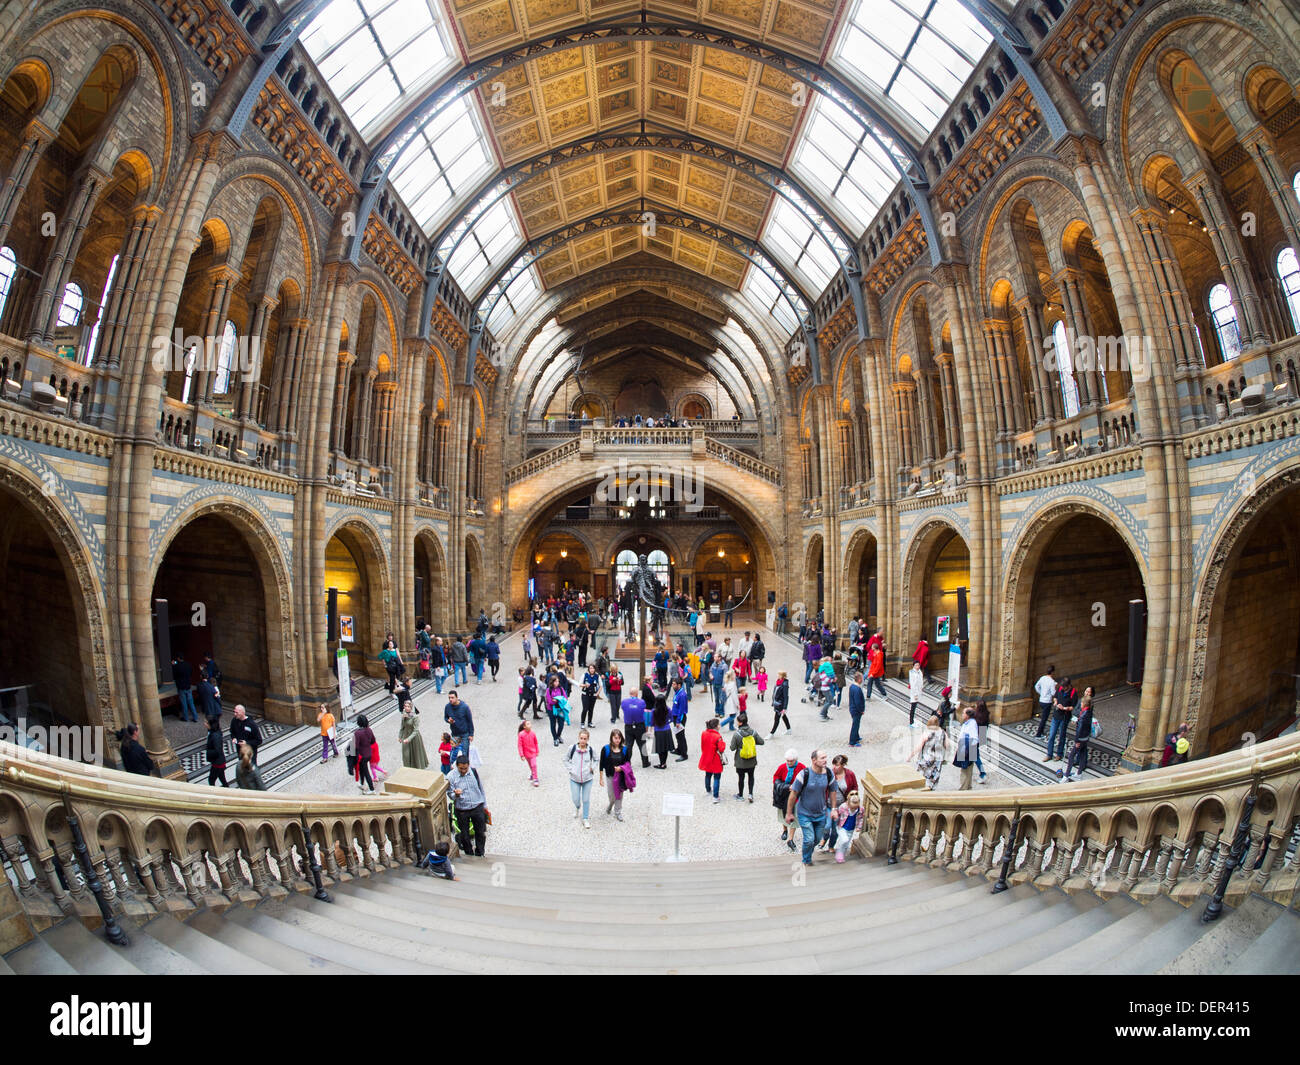 The Natural History Museum, London - Stock Photo